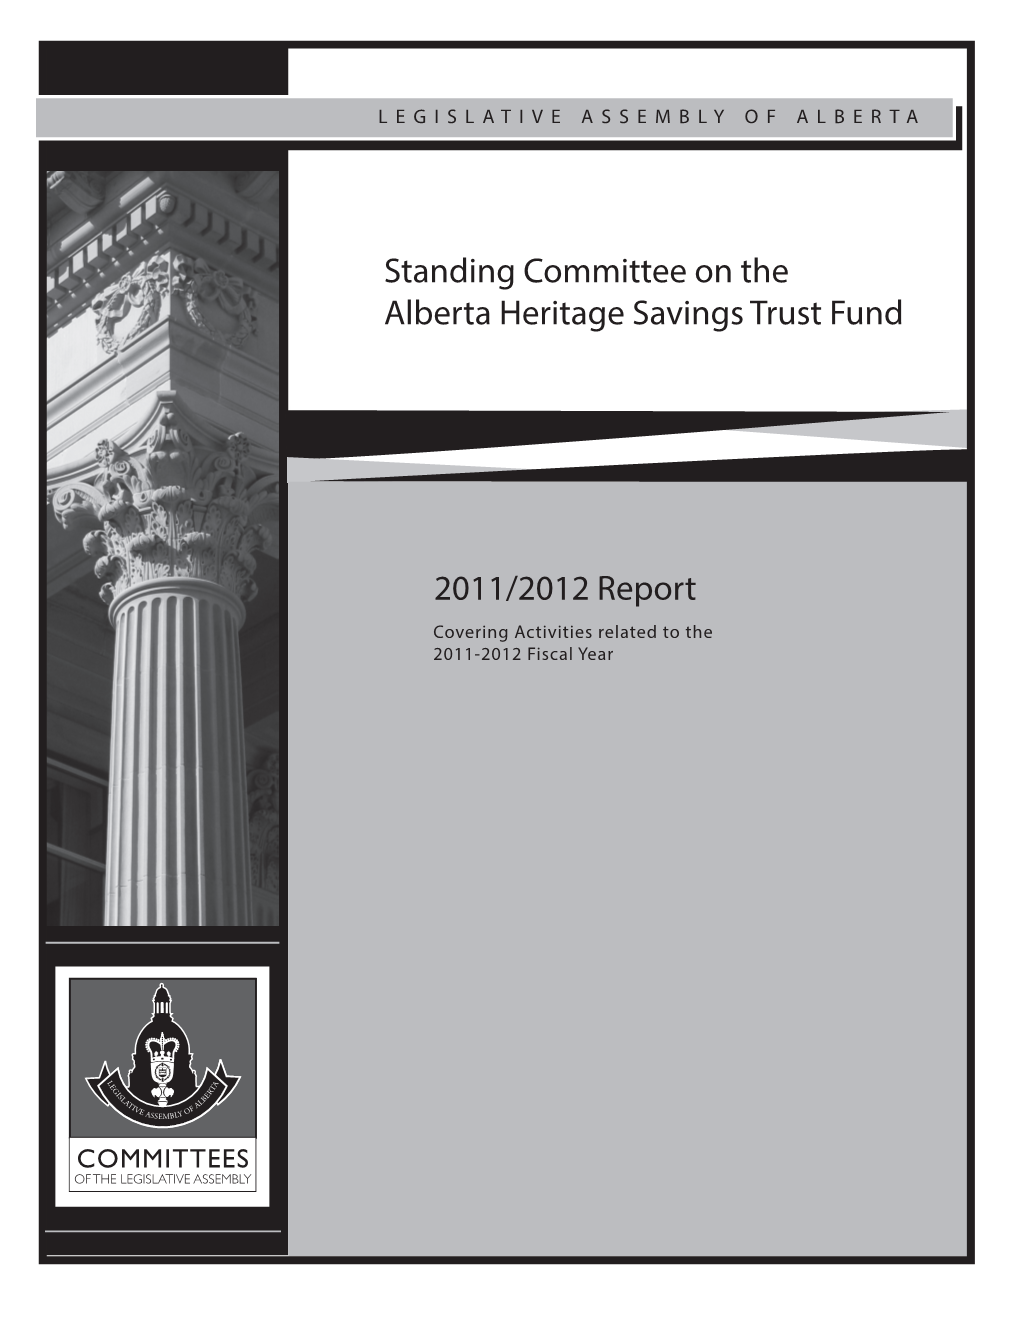 2011-12 Report Covering Activities Related to the 2011-2012 Fiscal Year